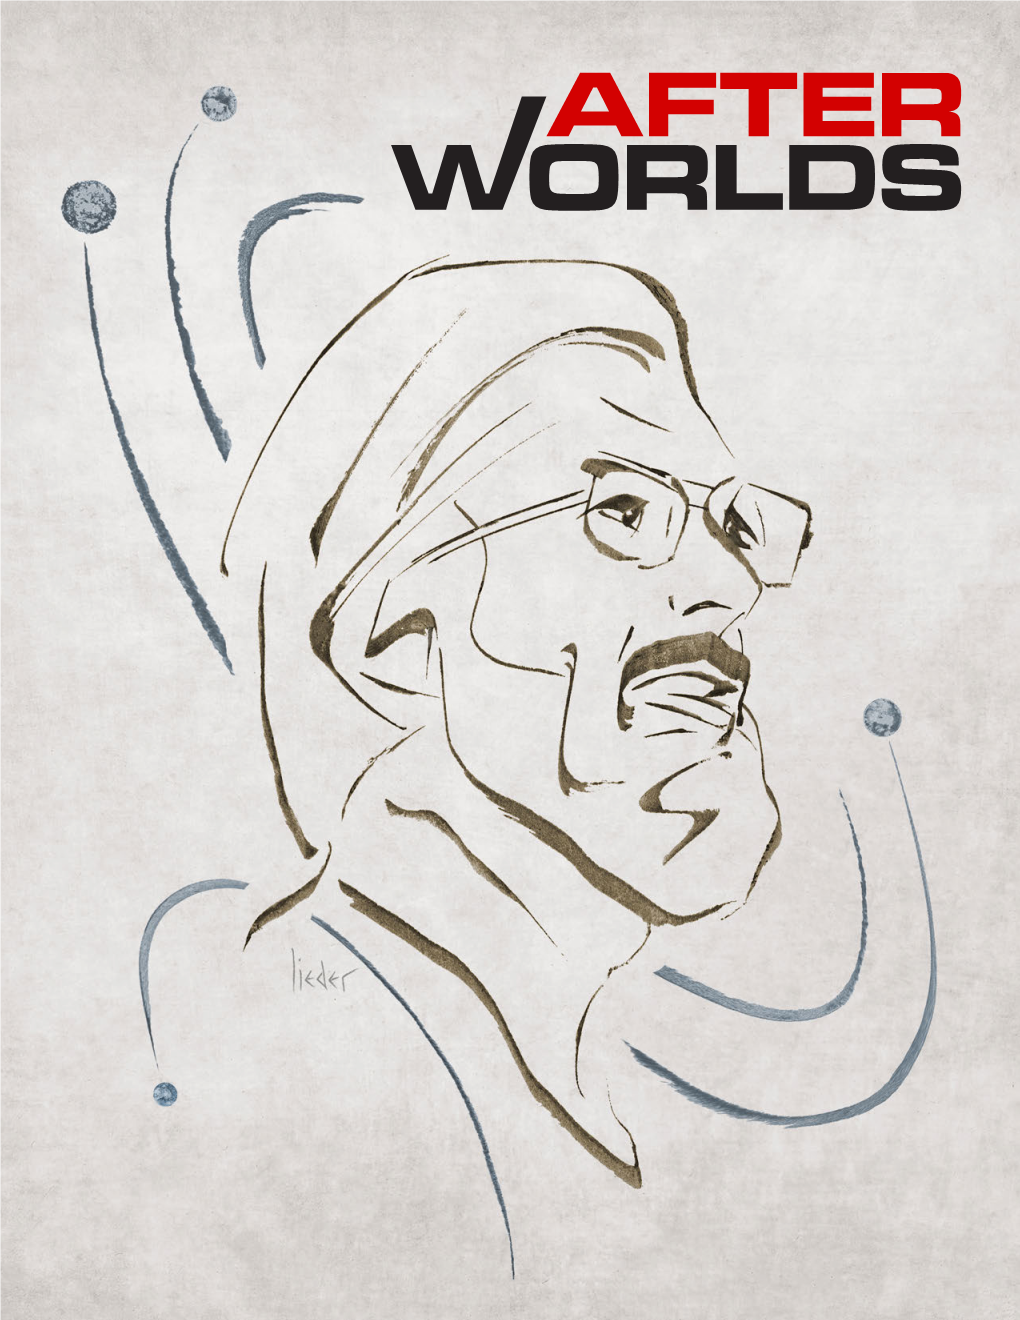 Outworlds 71 / Afterworlds in a Final Issue of Inworlds